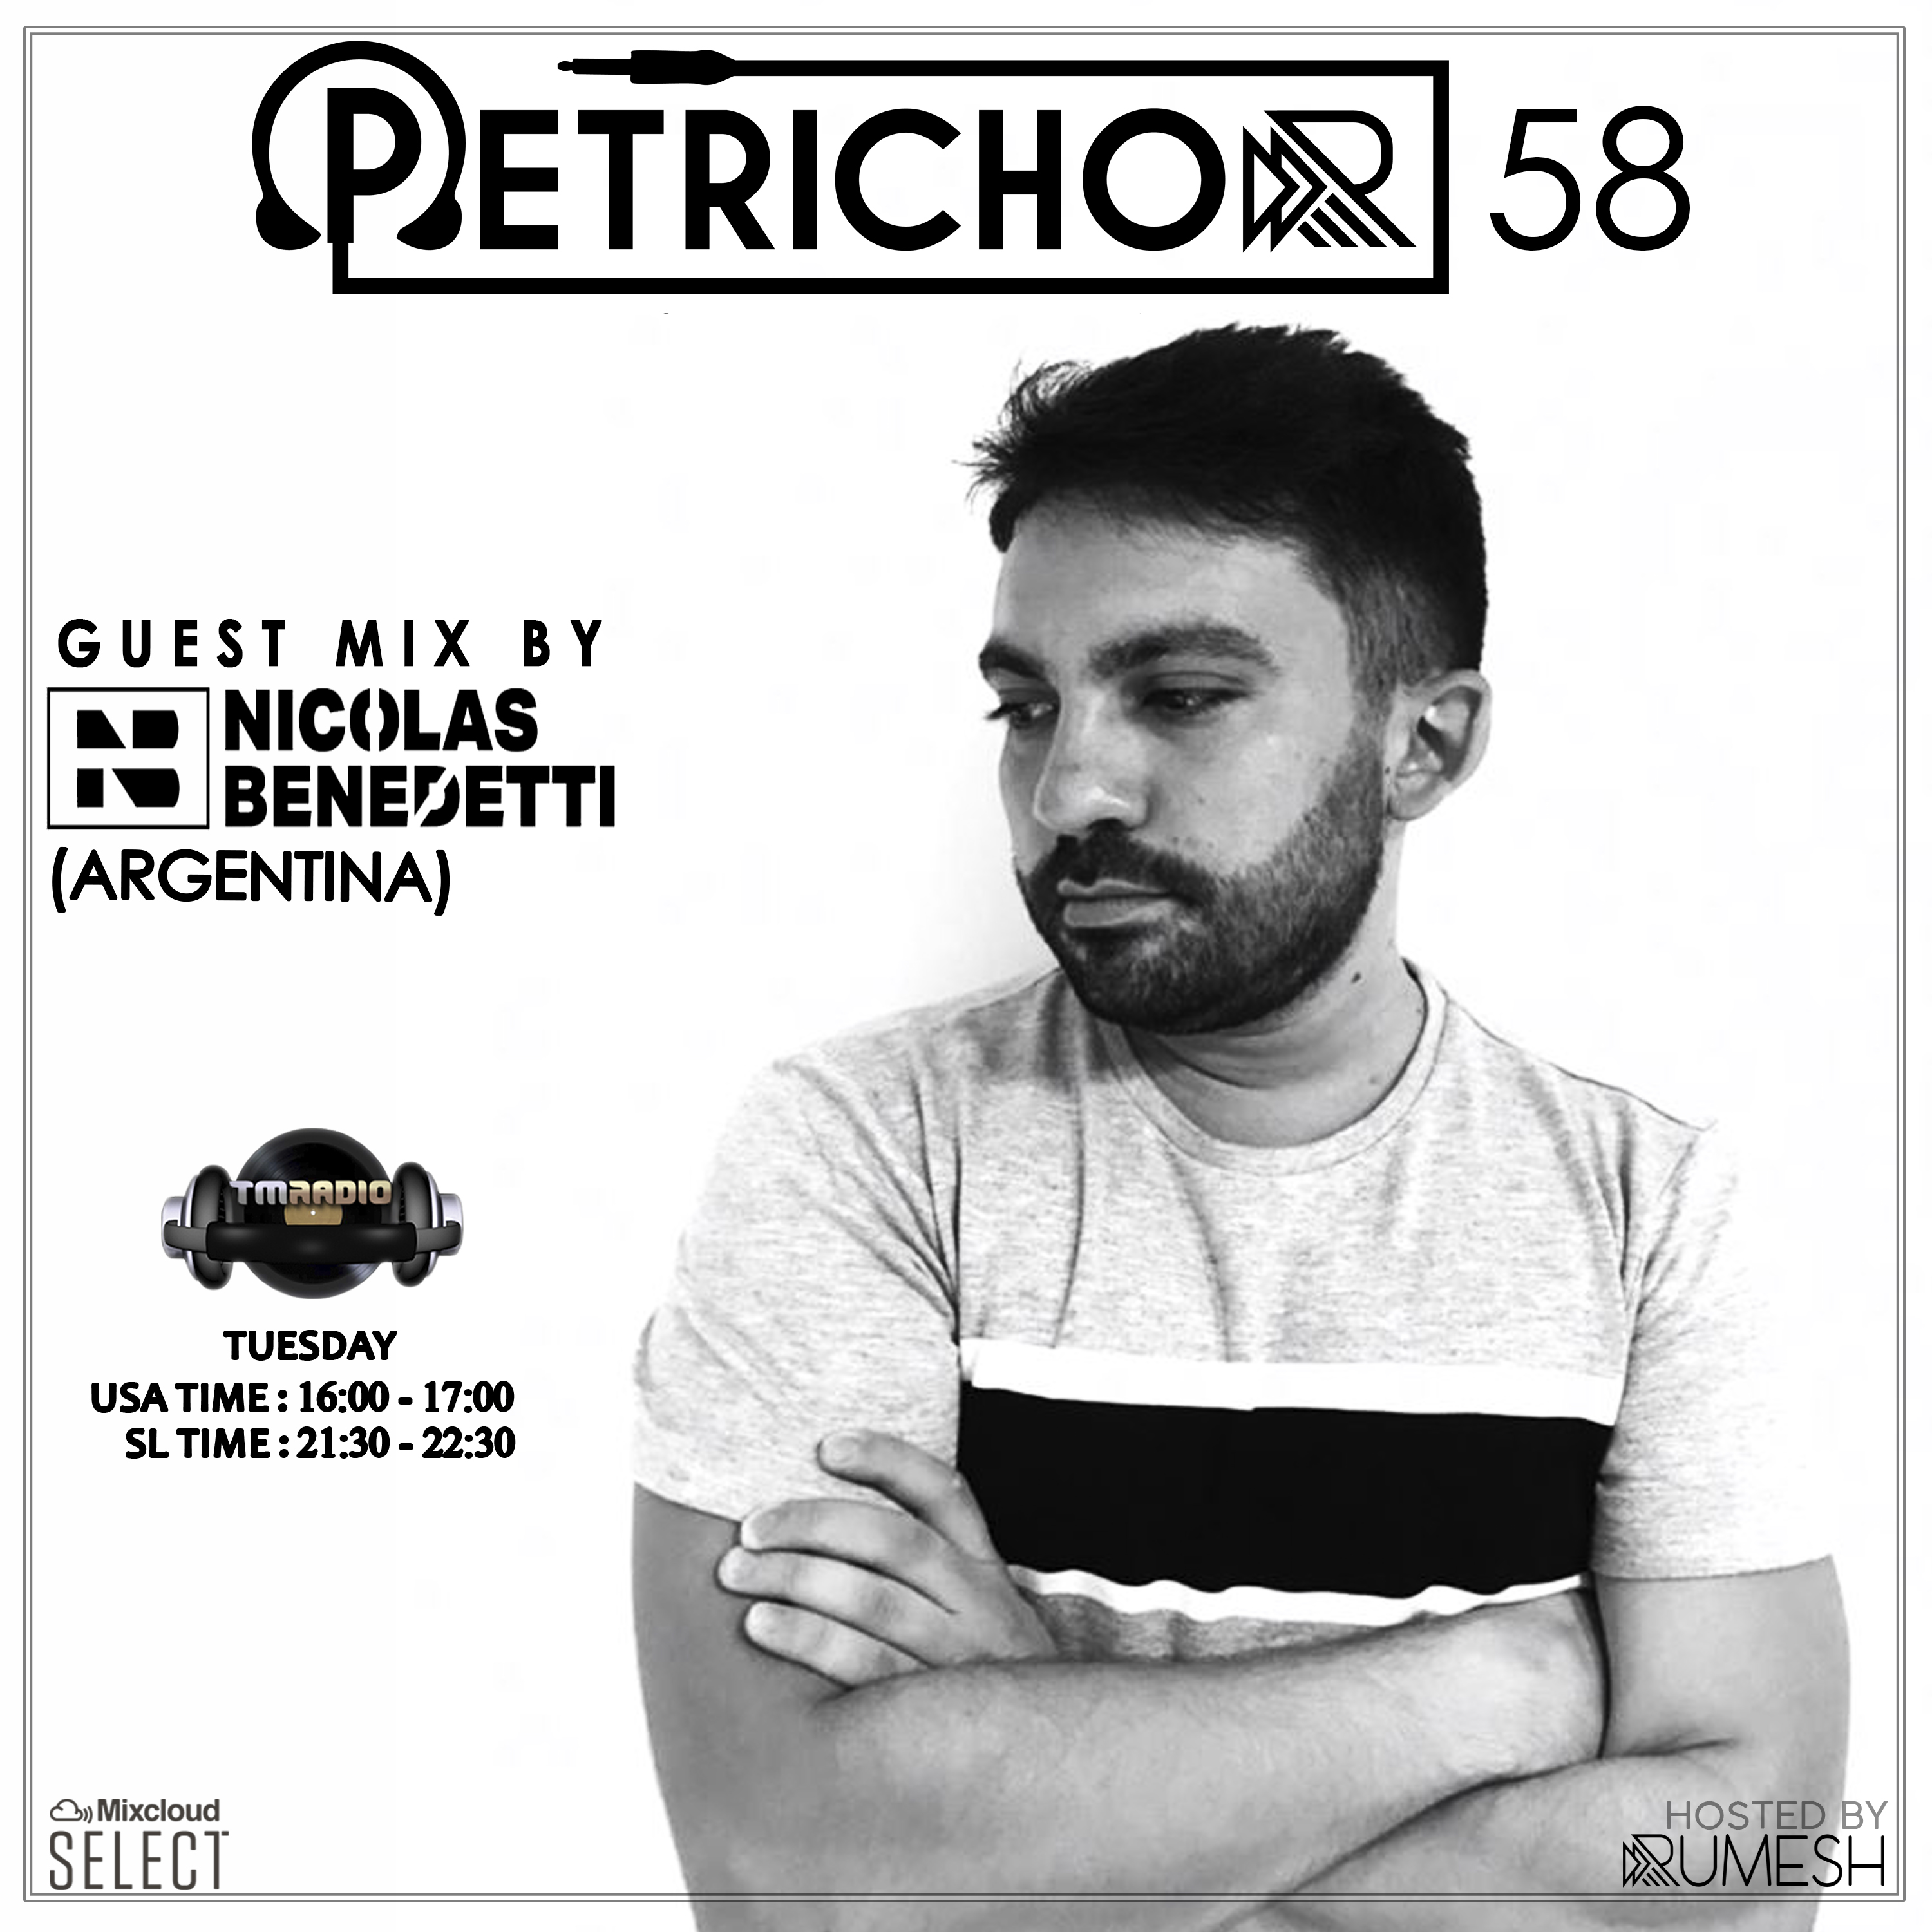 Petrichor 58 guest mix by Nicolas Benedetti (Argentina) (from December 17th, 2019)